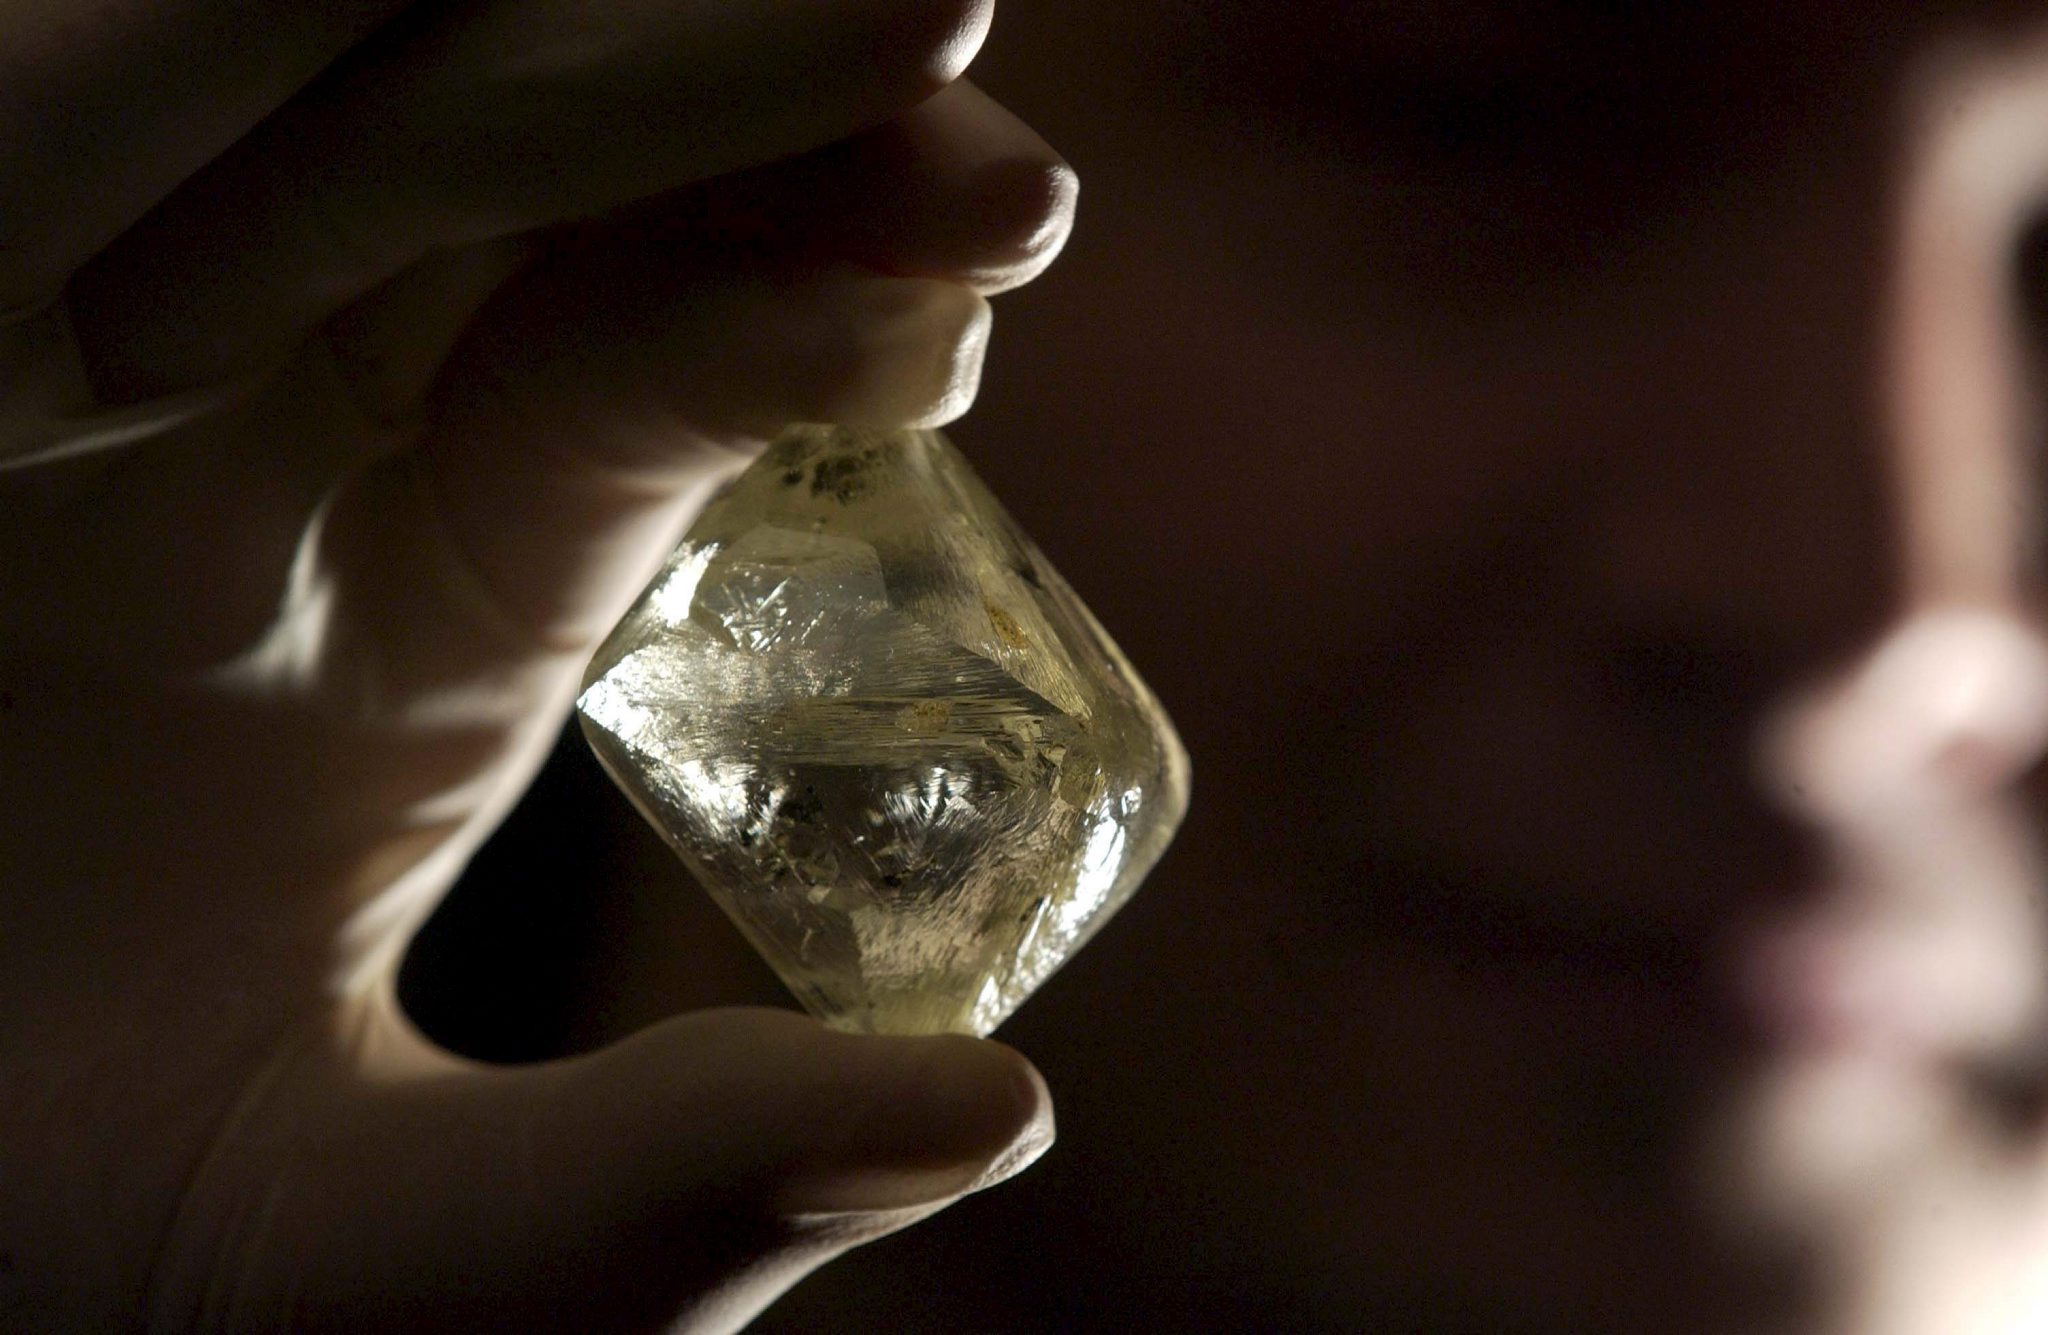 The 616 stone, the largest uncut diamond crystal in the world